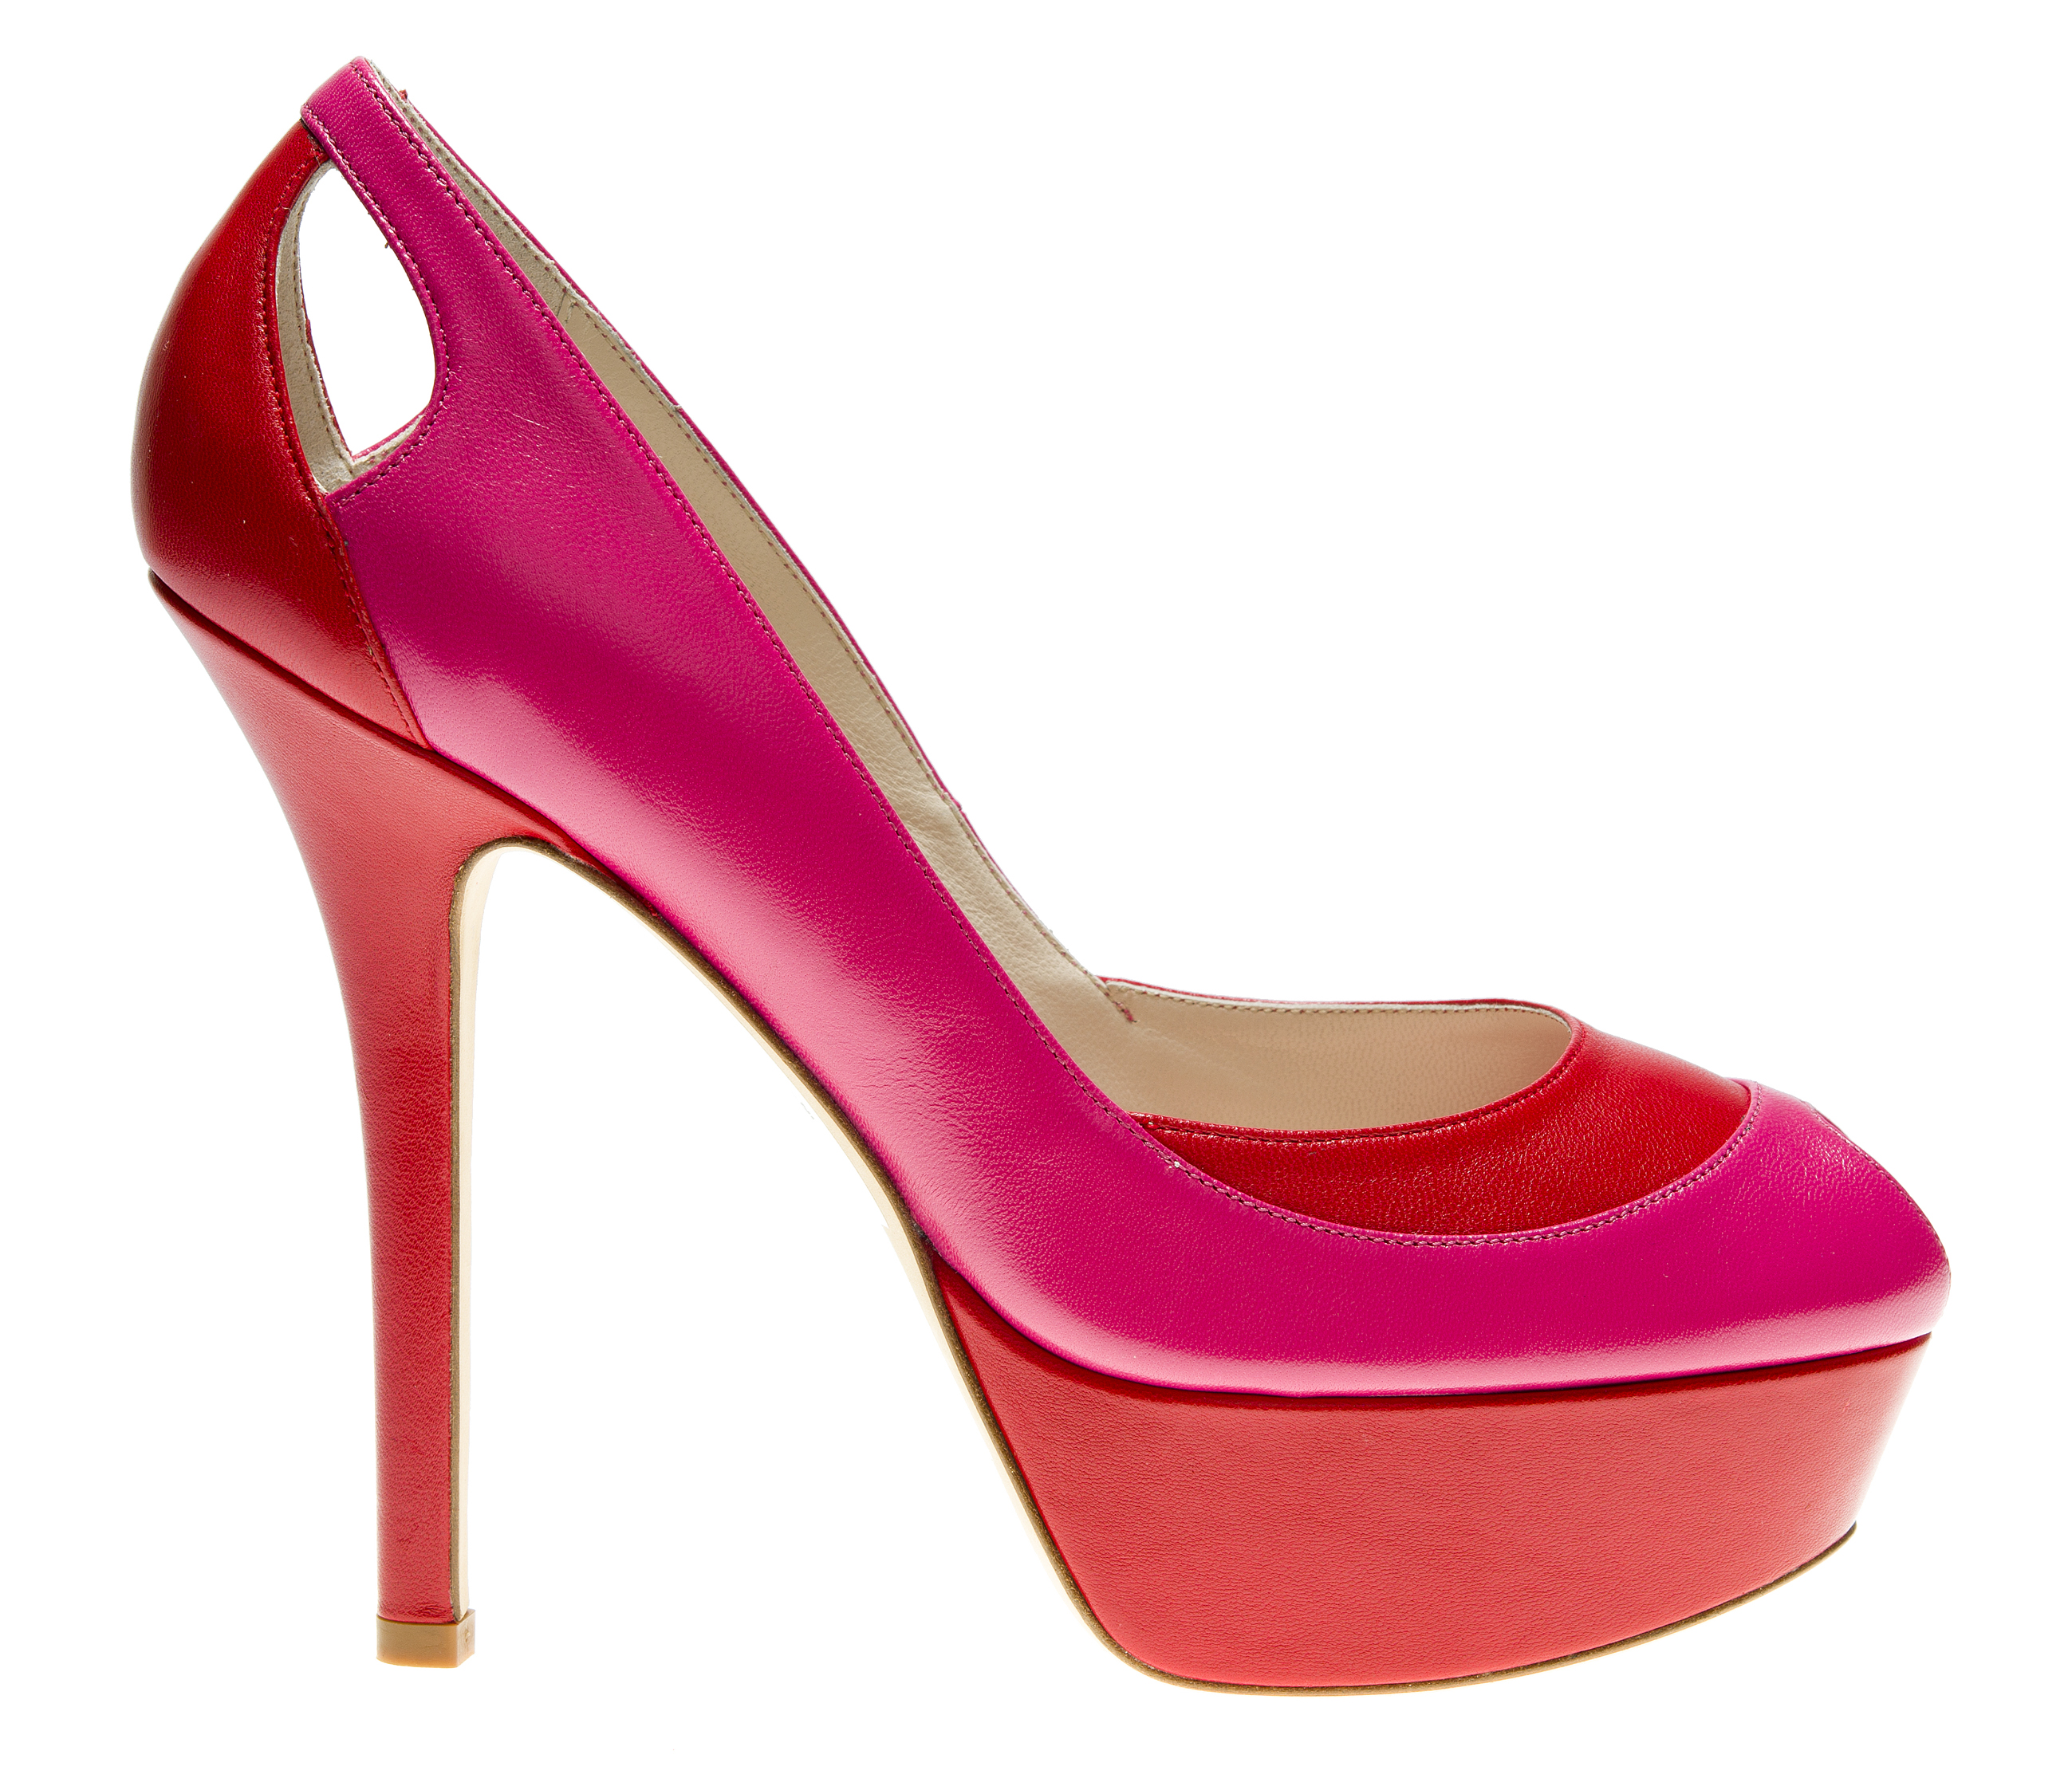 Gianna Meliani Spring 2014 Collection | R-A-W SHOES BLOG